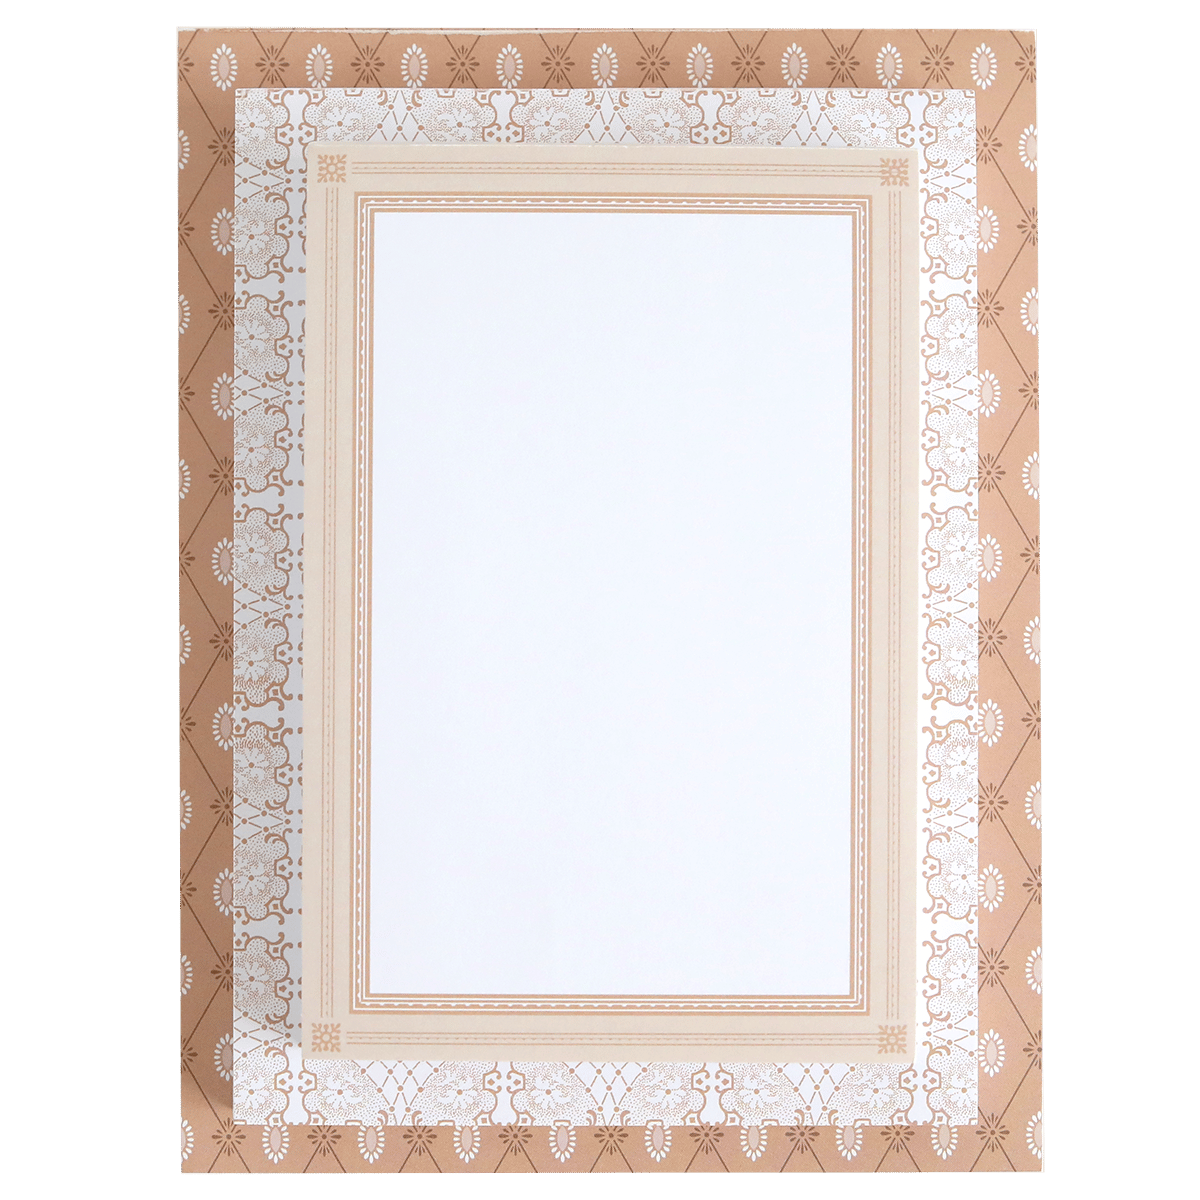 a picture frame with a pattern on it.